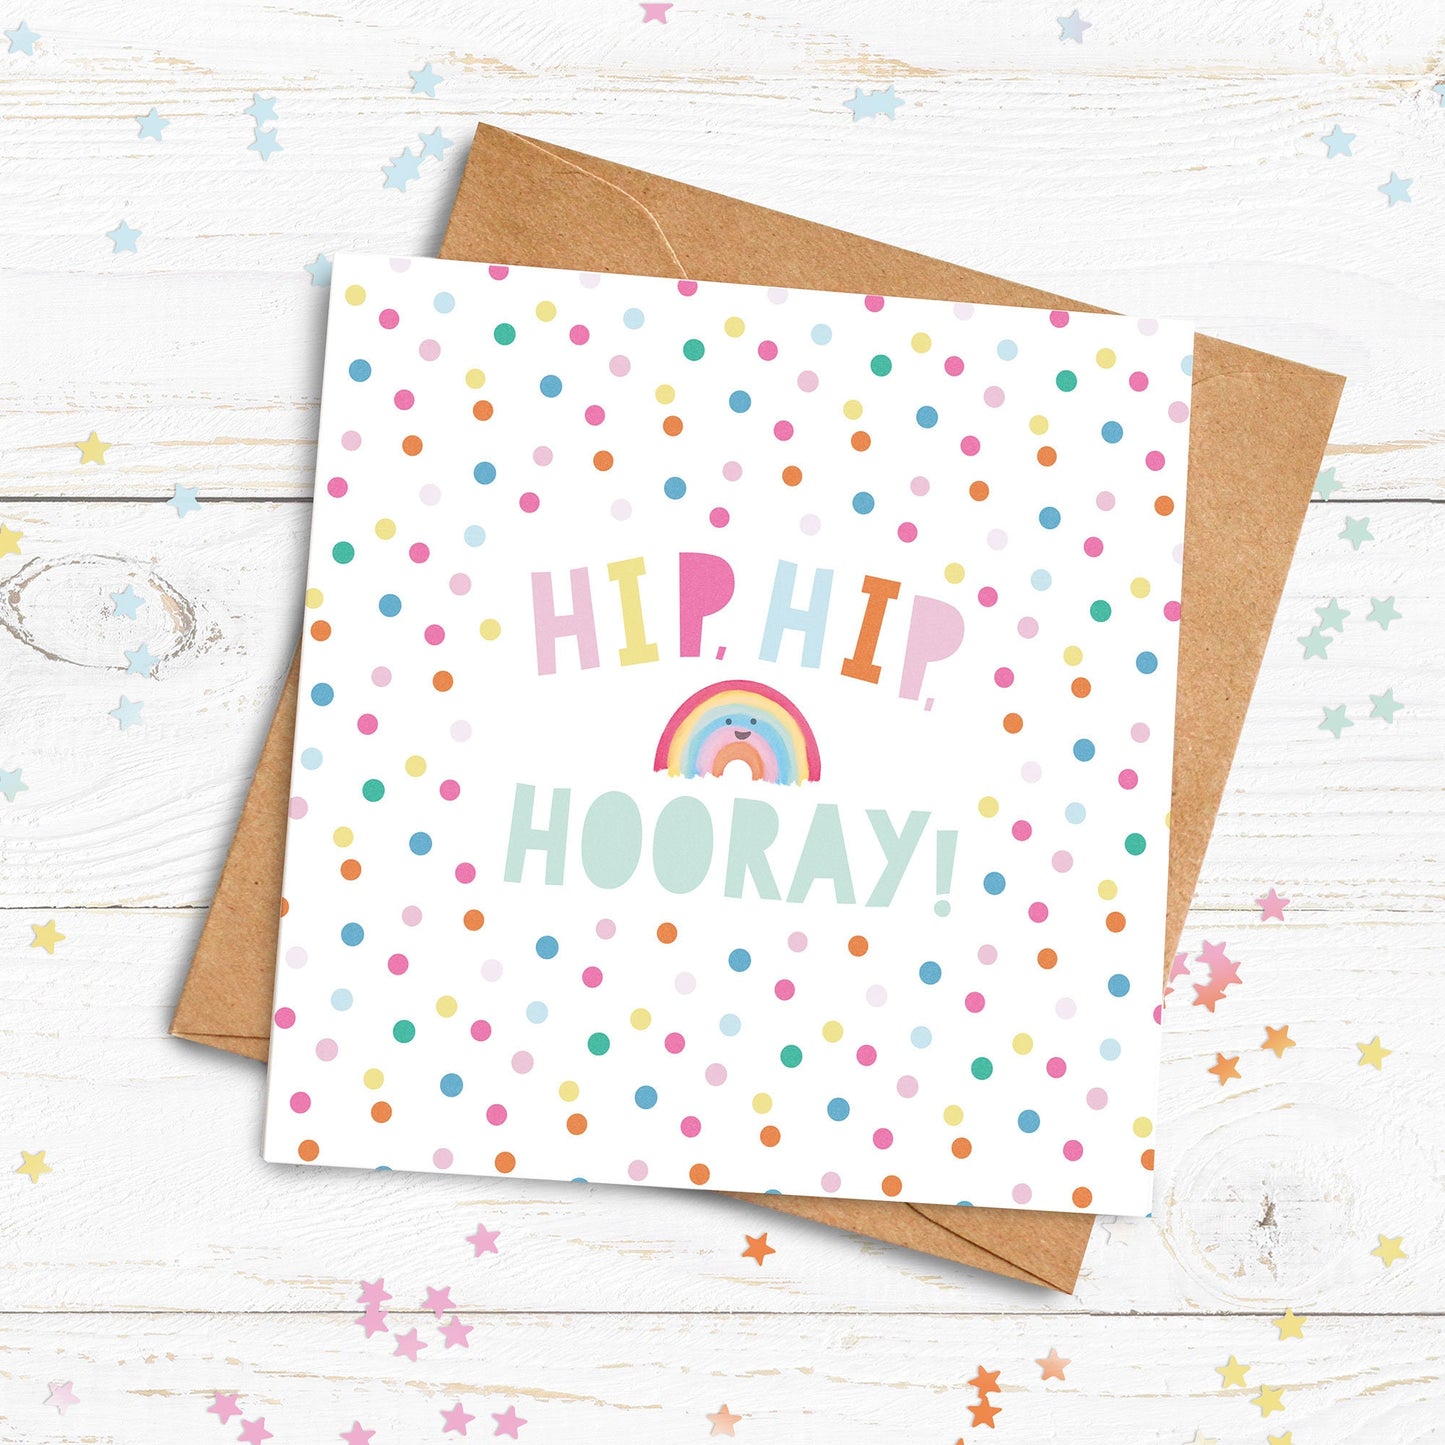 Hip, Hip Hooray! Rainbow Card. Personalised Well Done Card. Congratulations Card. Passed Exams Card. Graduation Card. Send Direct Option.